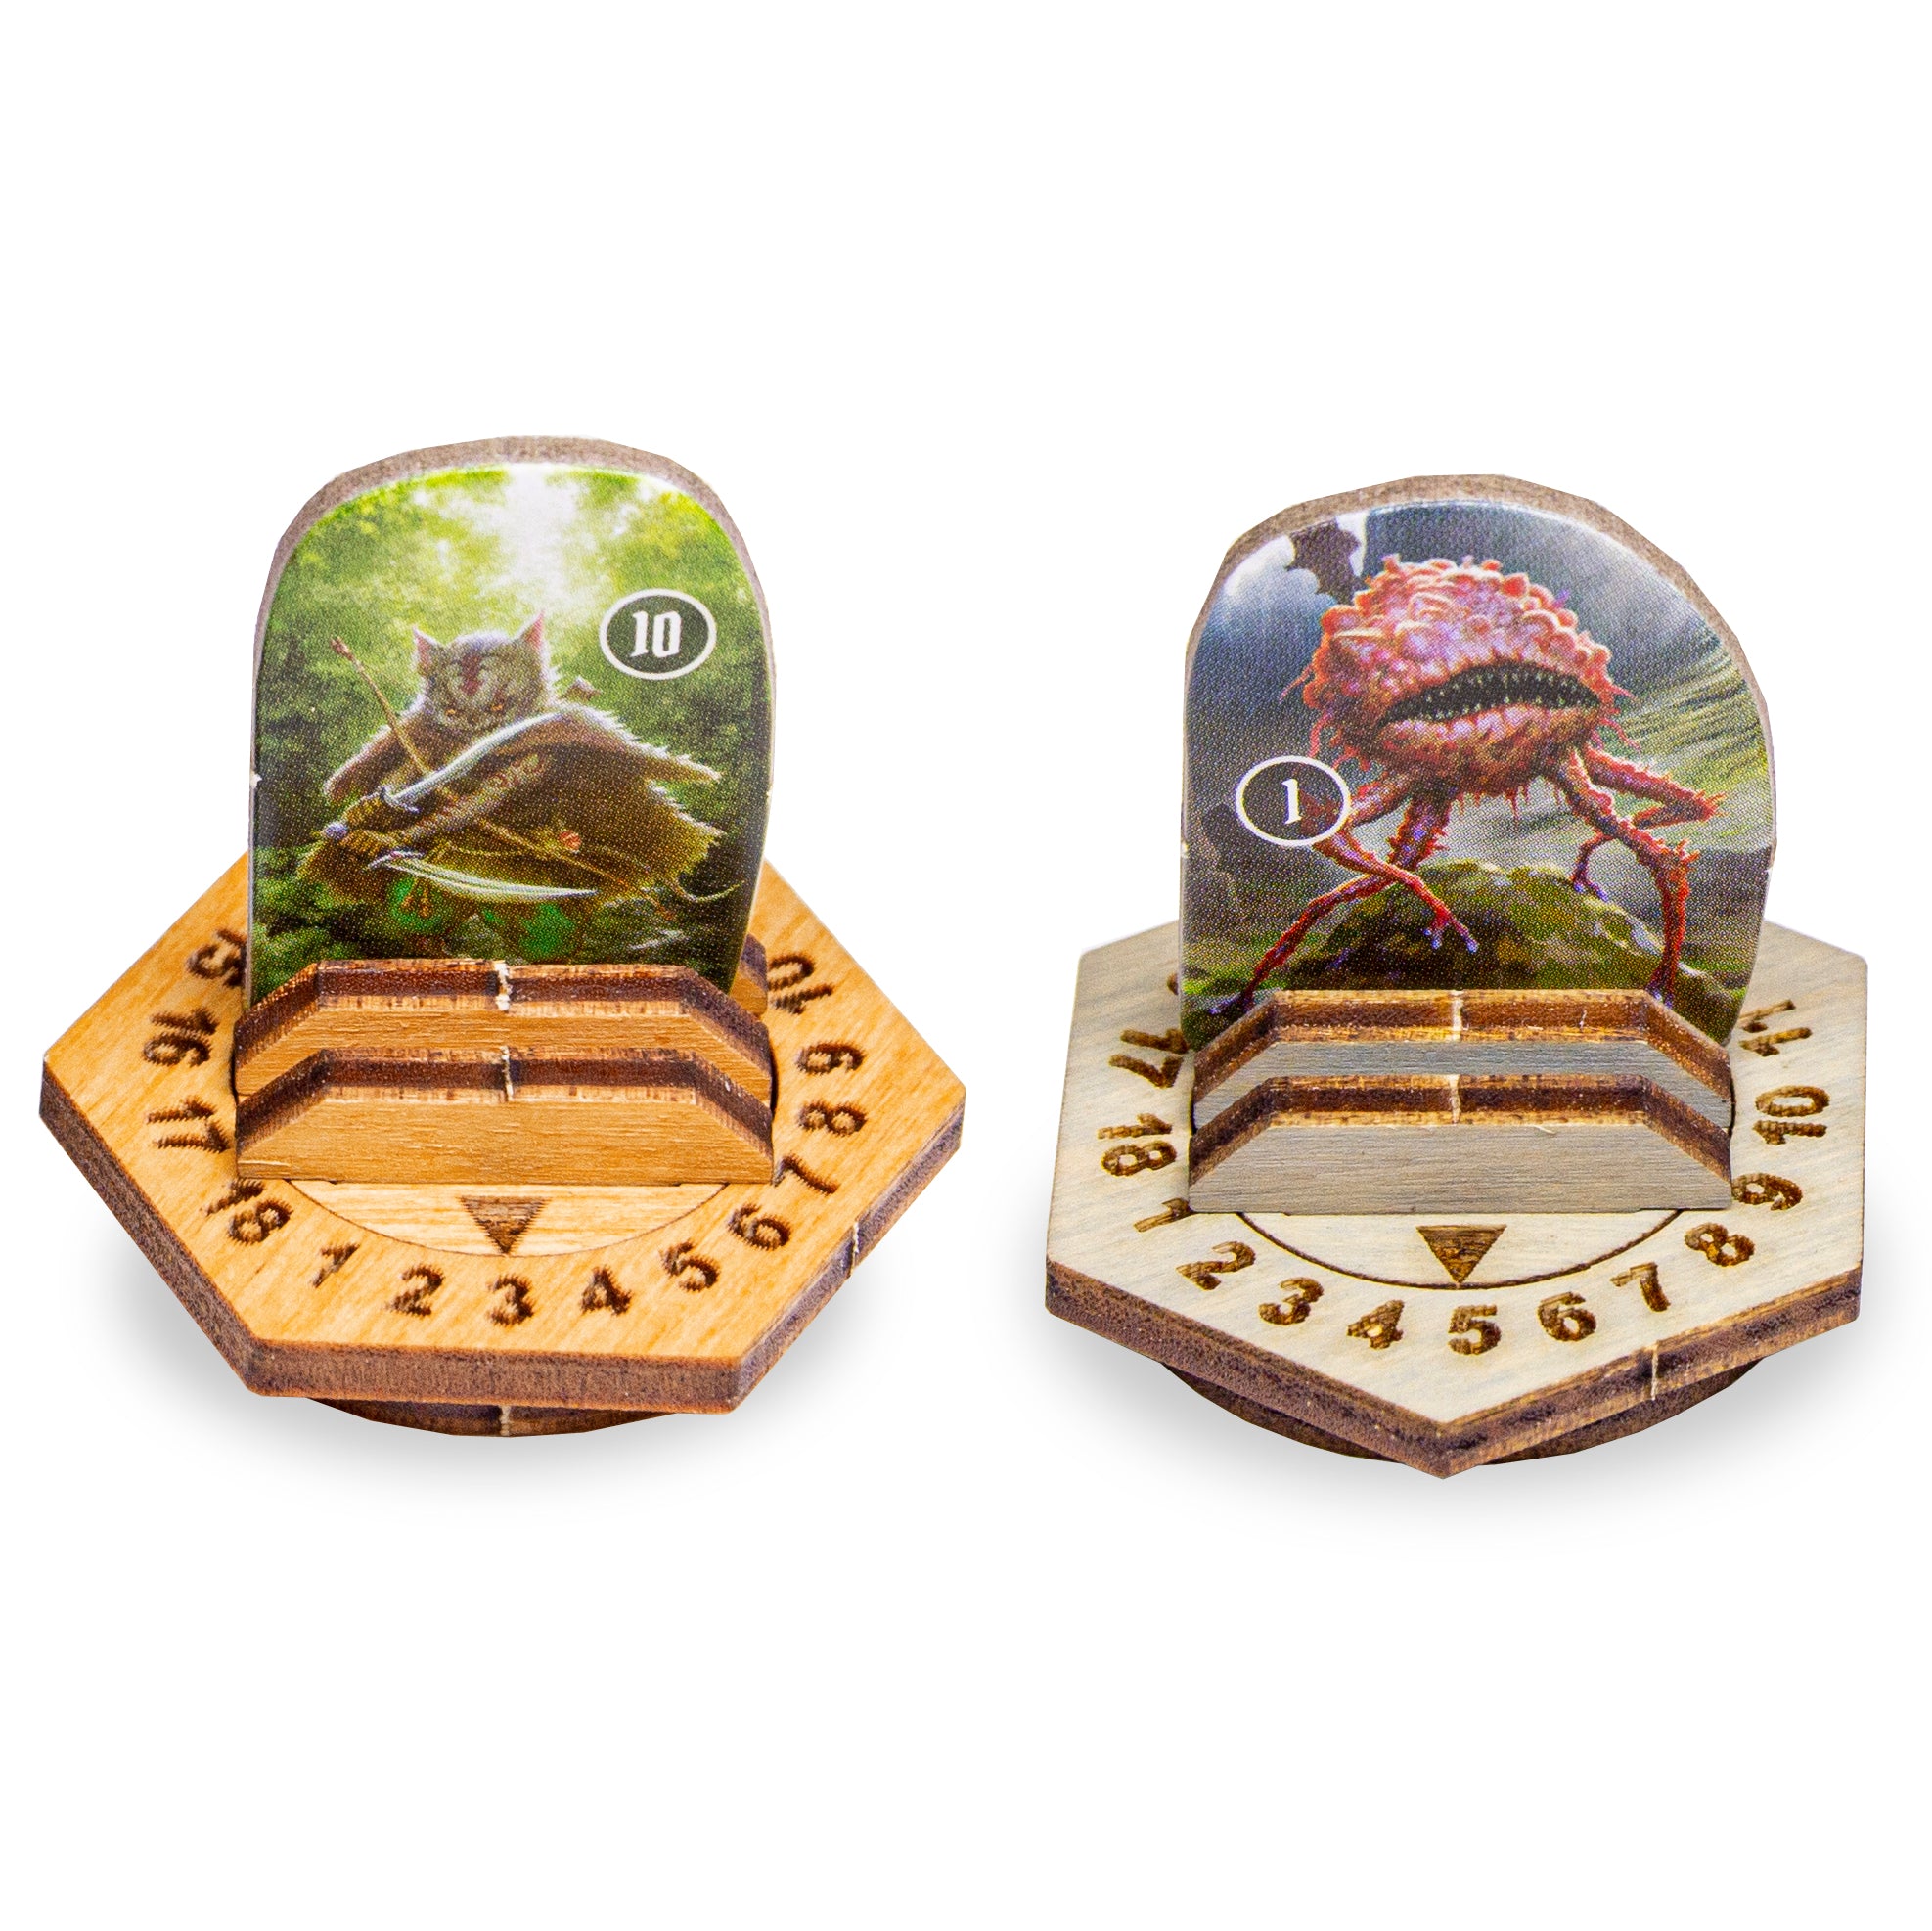 Frosthaven Monster Stands Made of Wood - Monster Live Counter Compatible with Frosthaven and  Gloomhaven Board Game